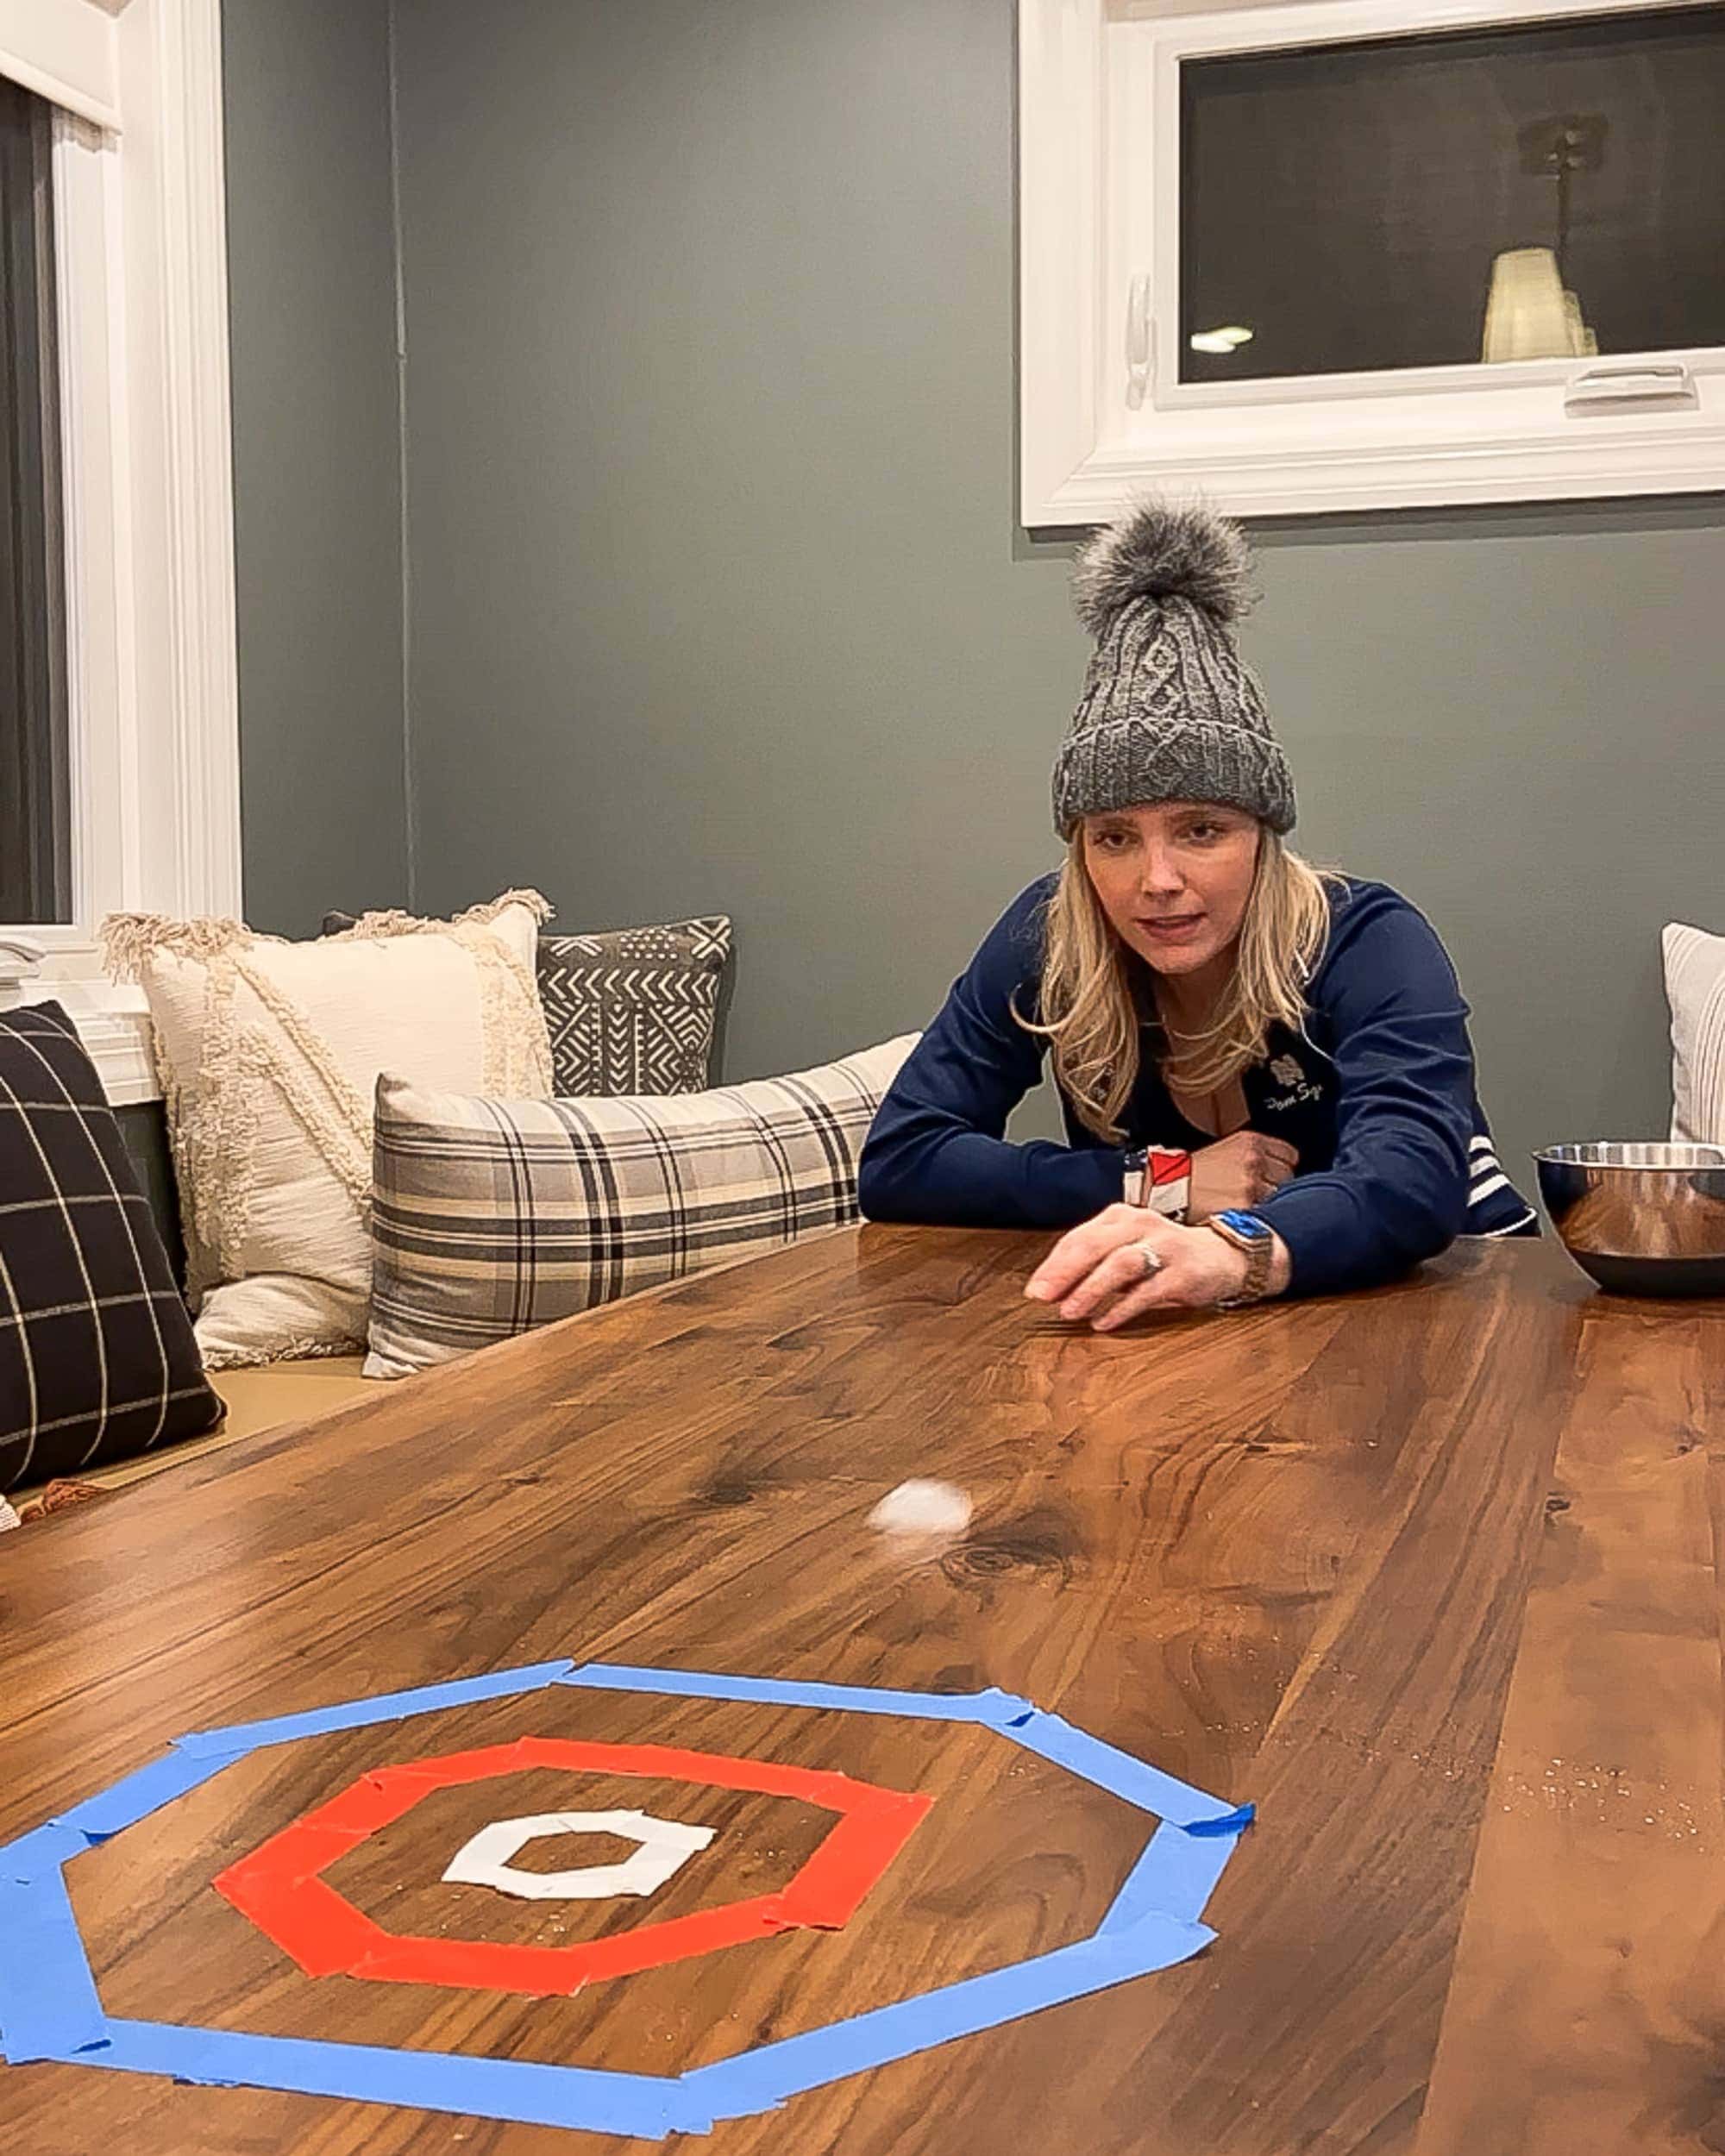 Winter olympics date night challenge, curling using ice cubes